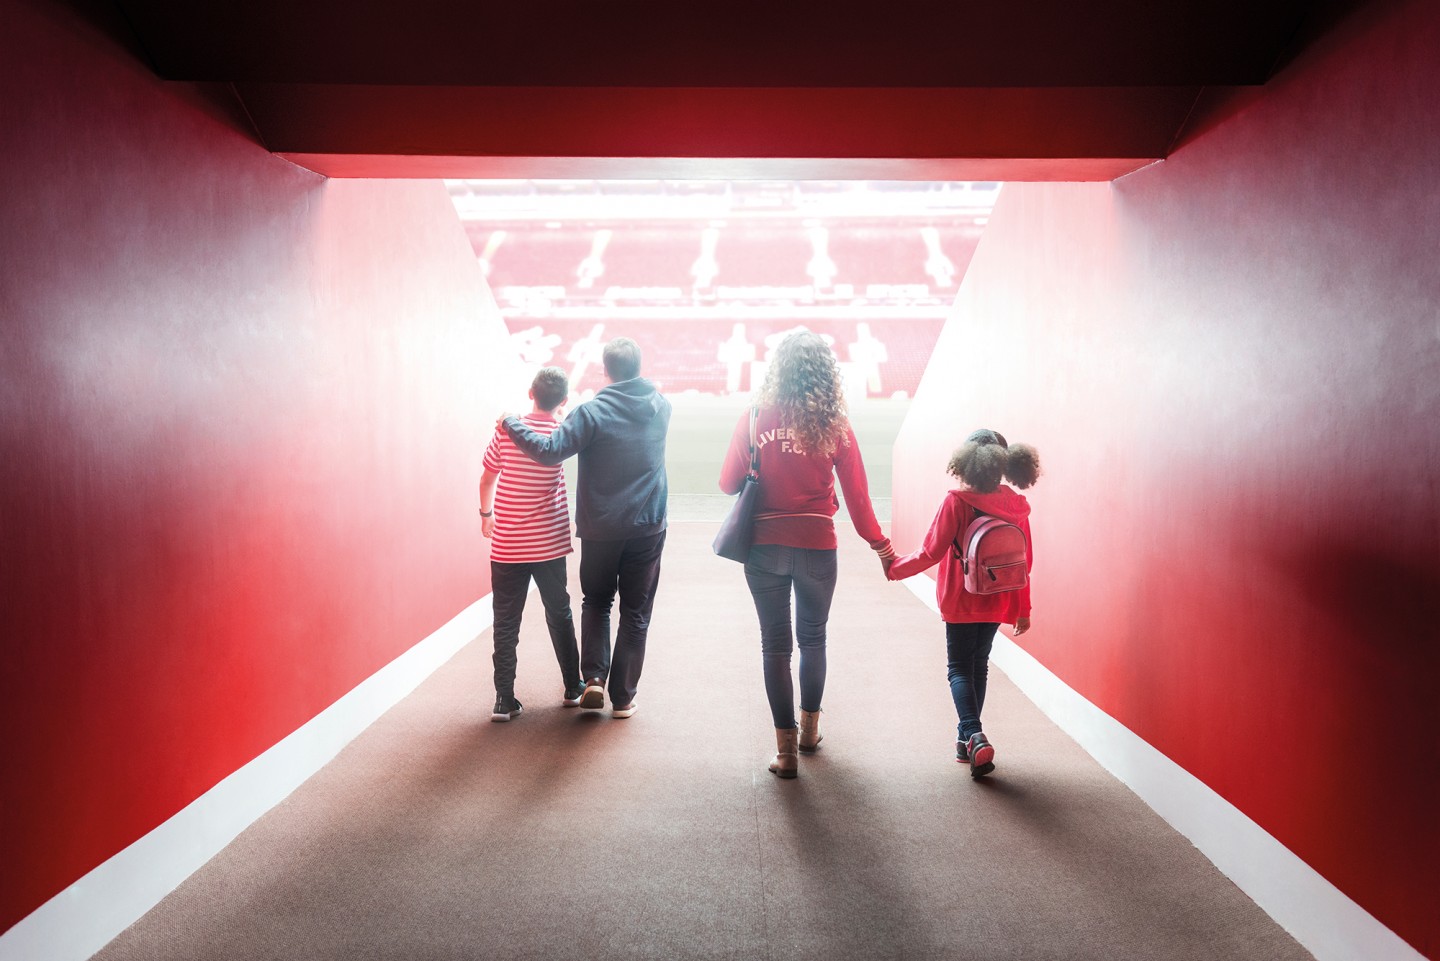 Liverpool Fc And Anfield Stadium Tour Day Trip Manchester Sightseeing